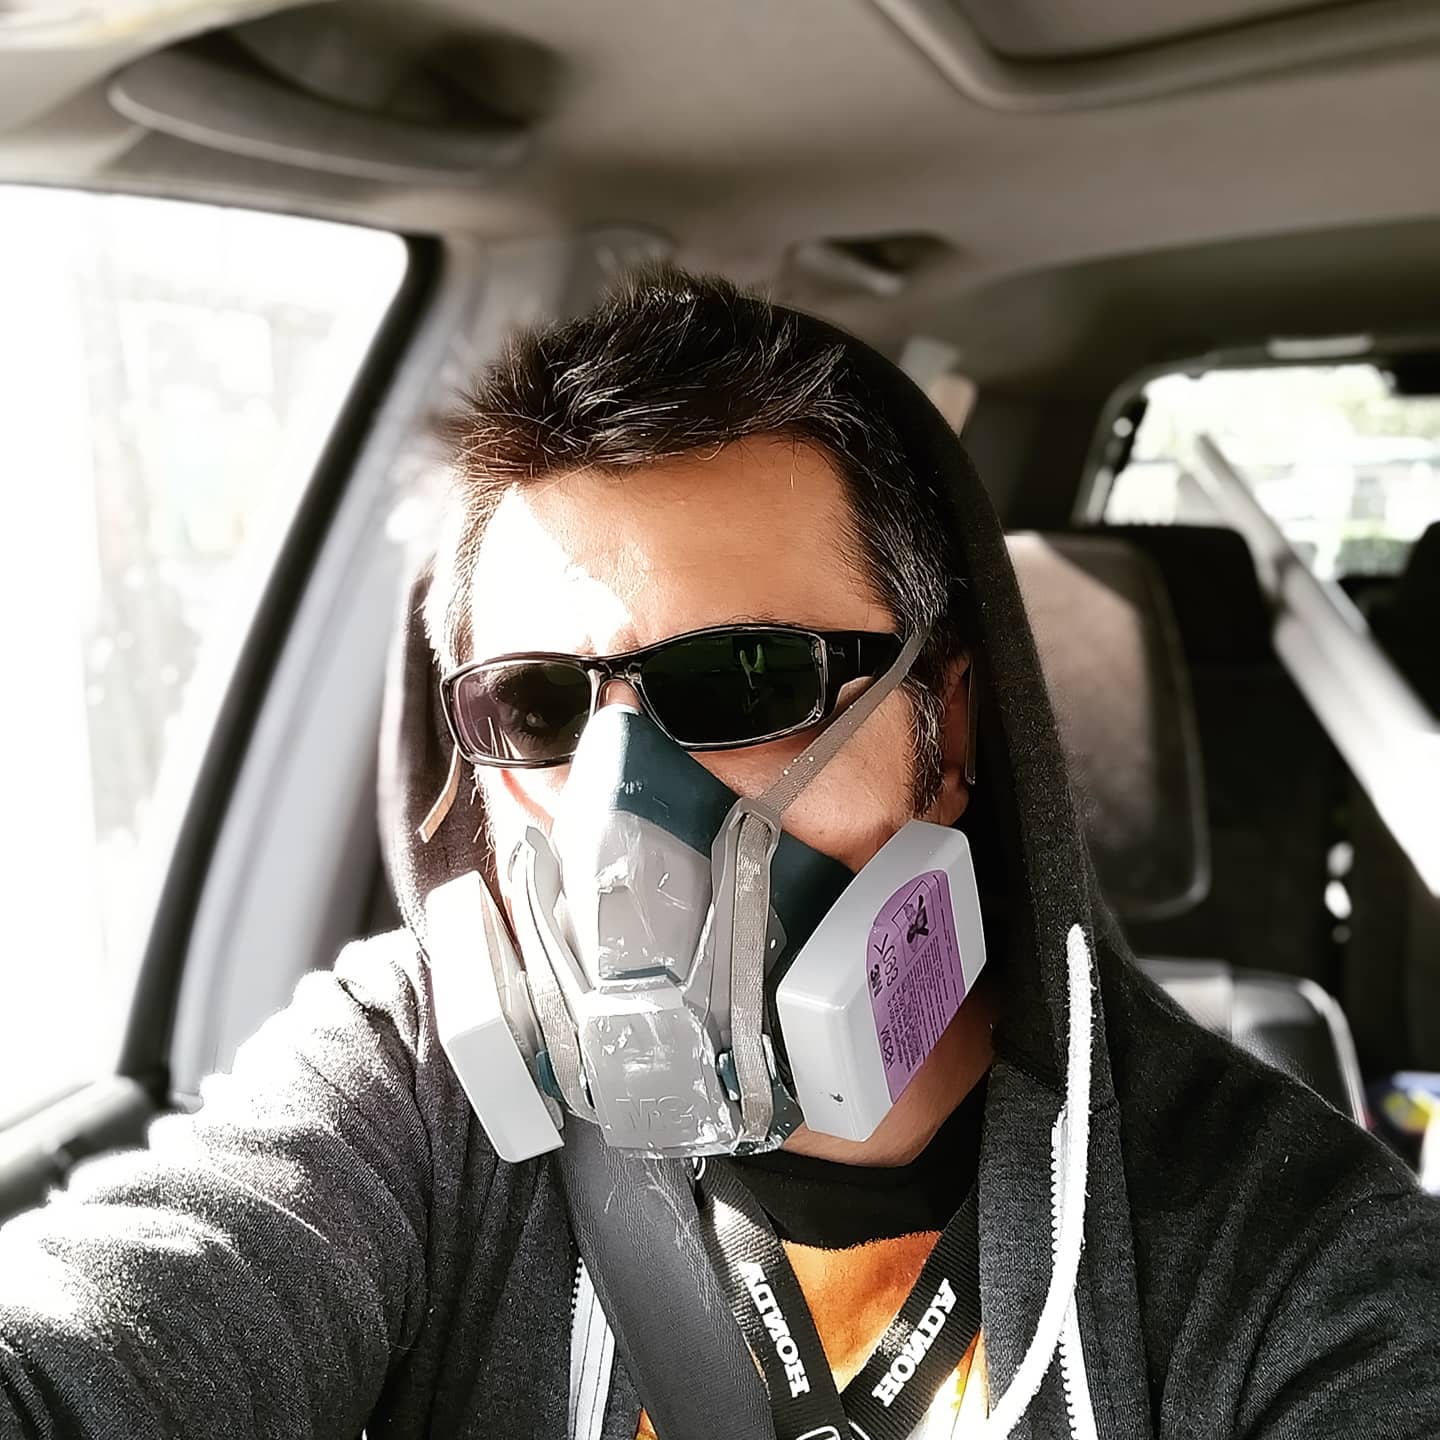 Went to Home Depot, approximately 90% were wearing masks...